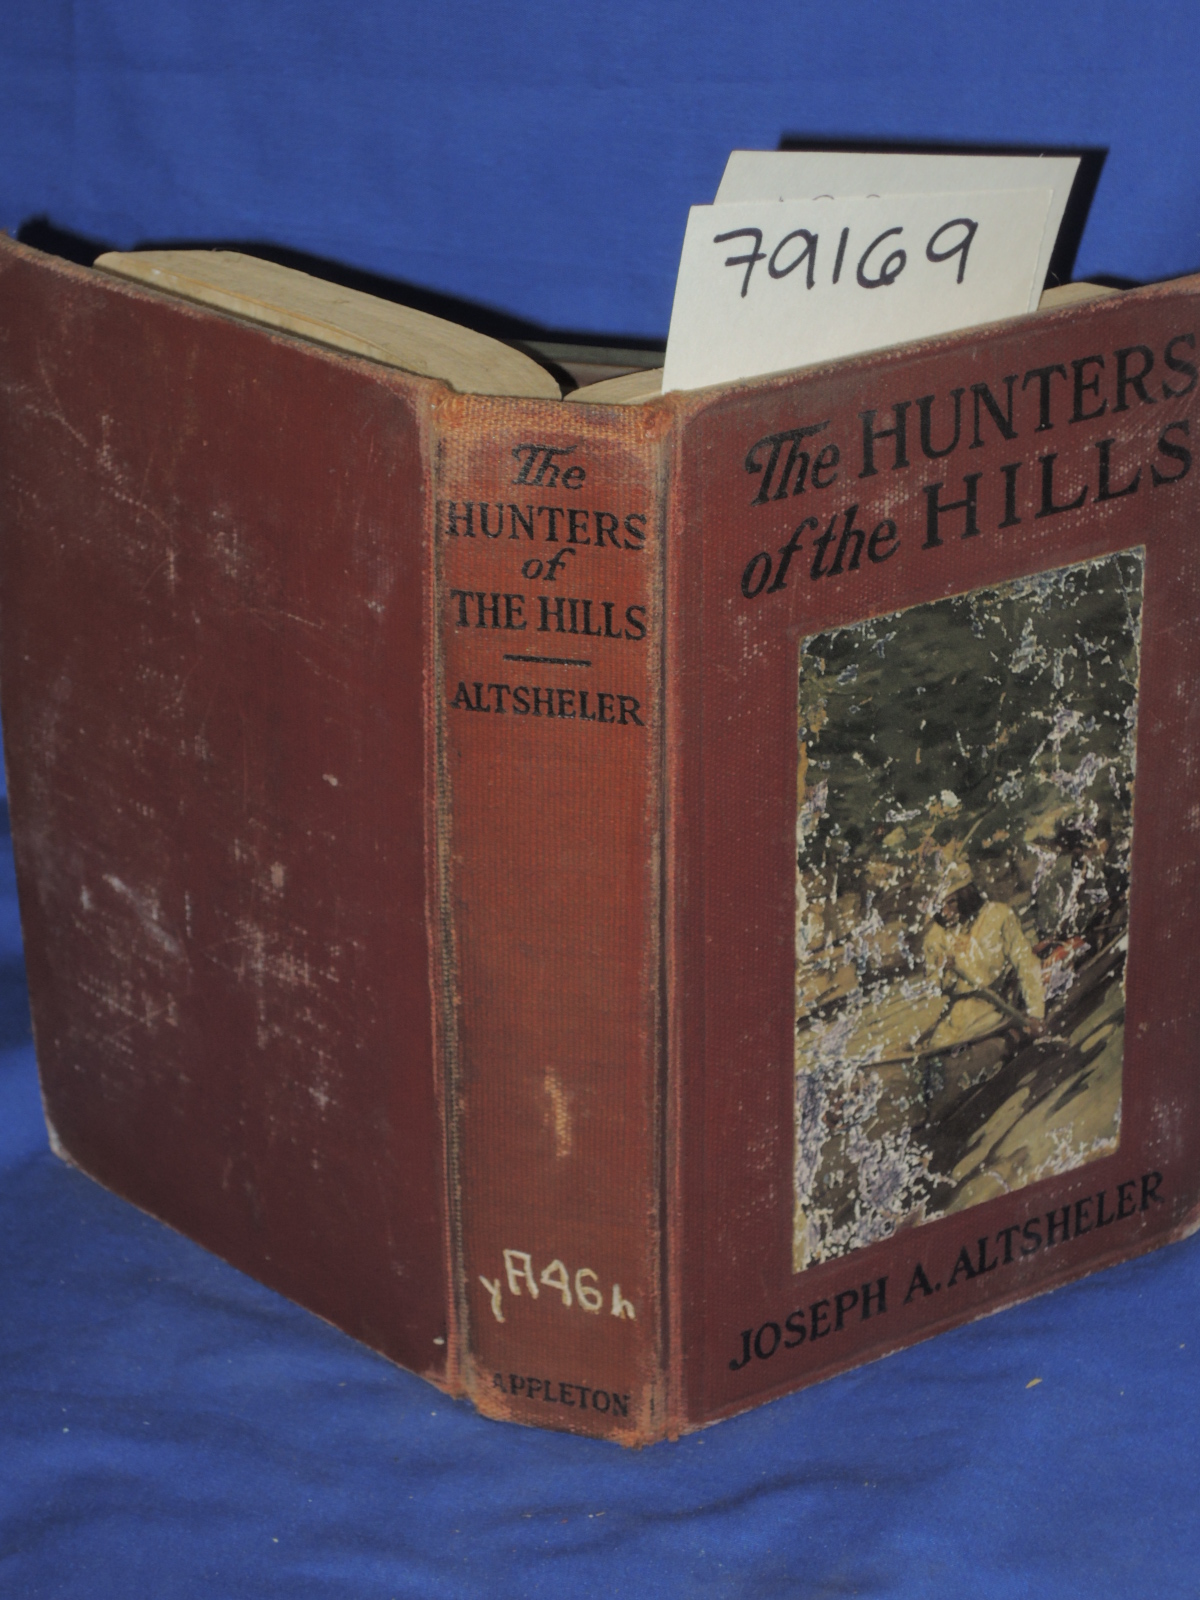 Altsheler, Joseph A.: THE HUNTERS OF THE HILLS